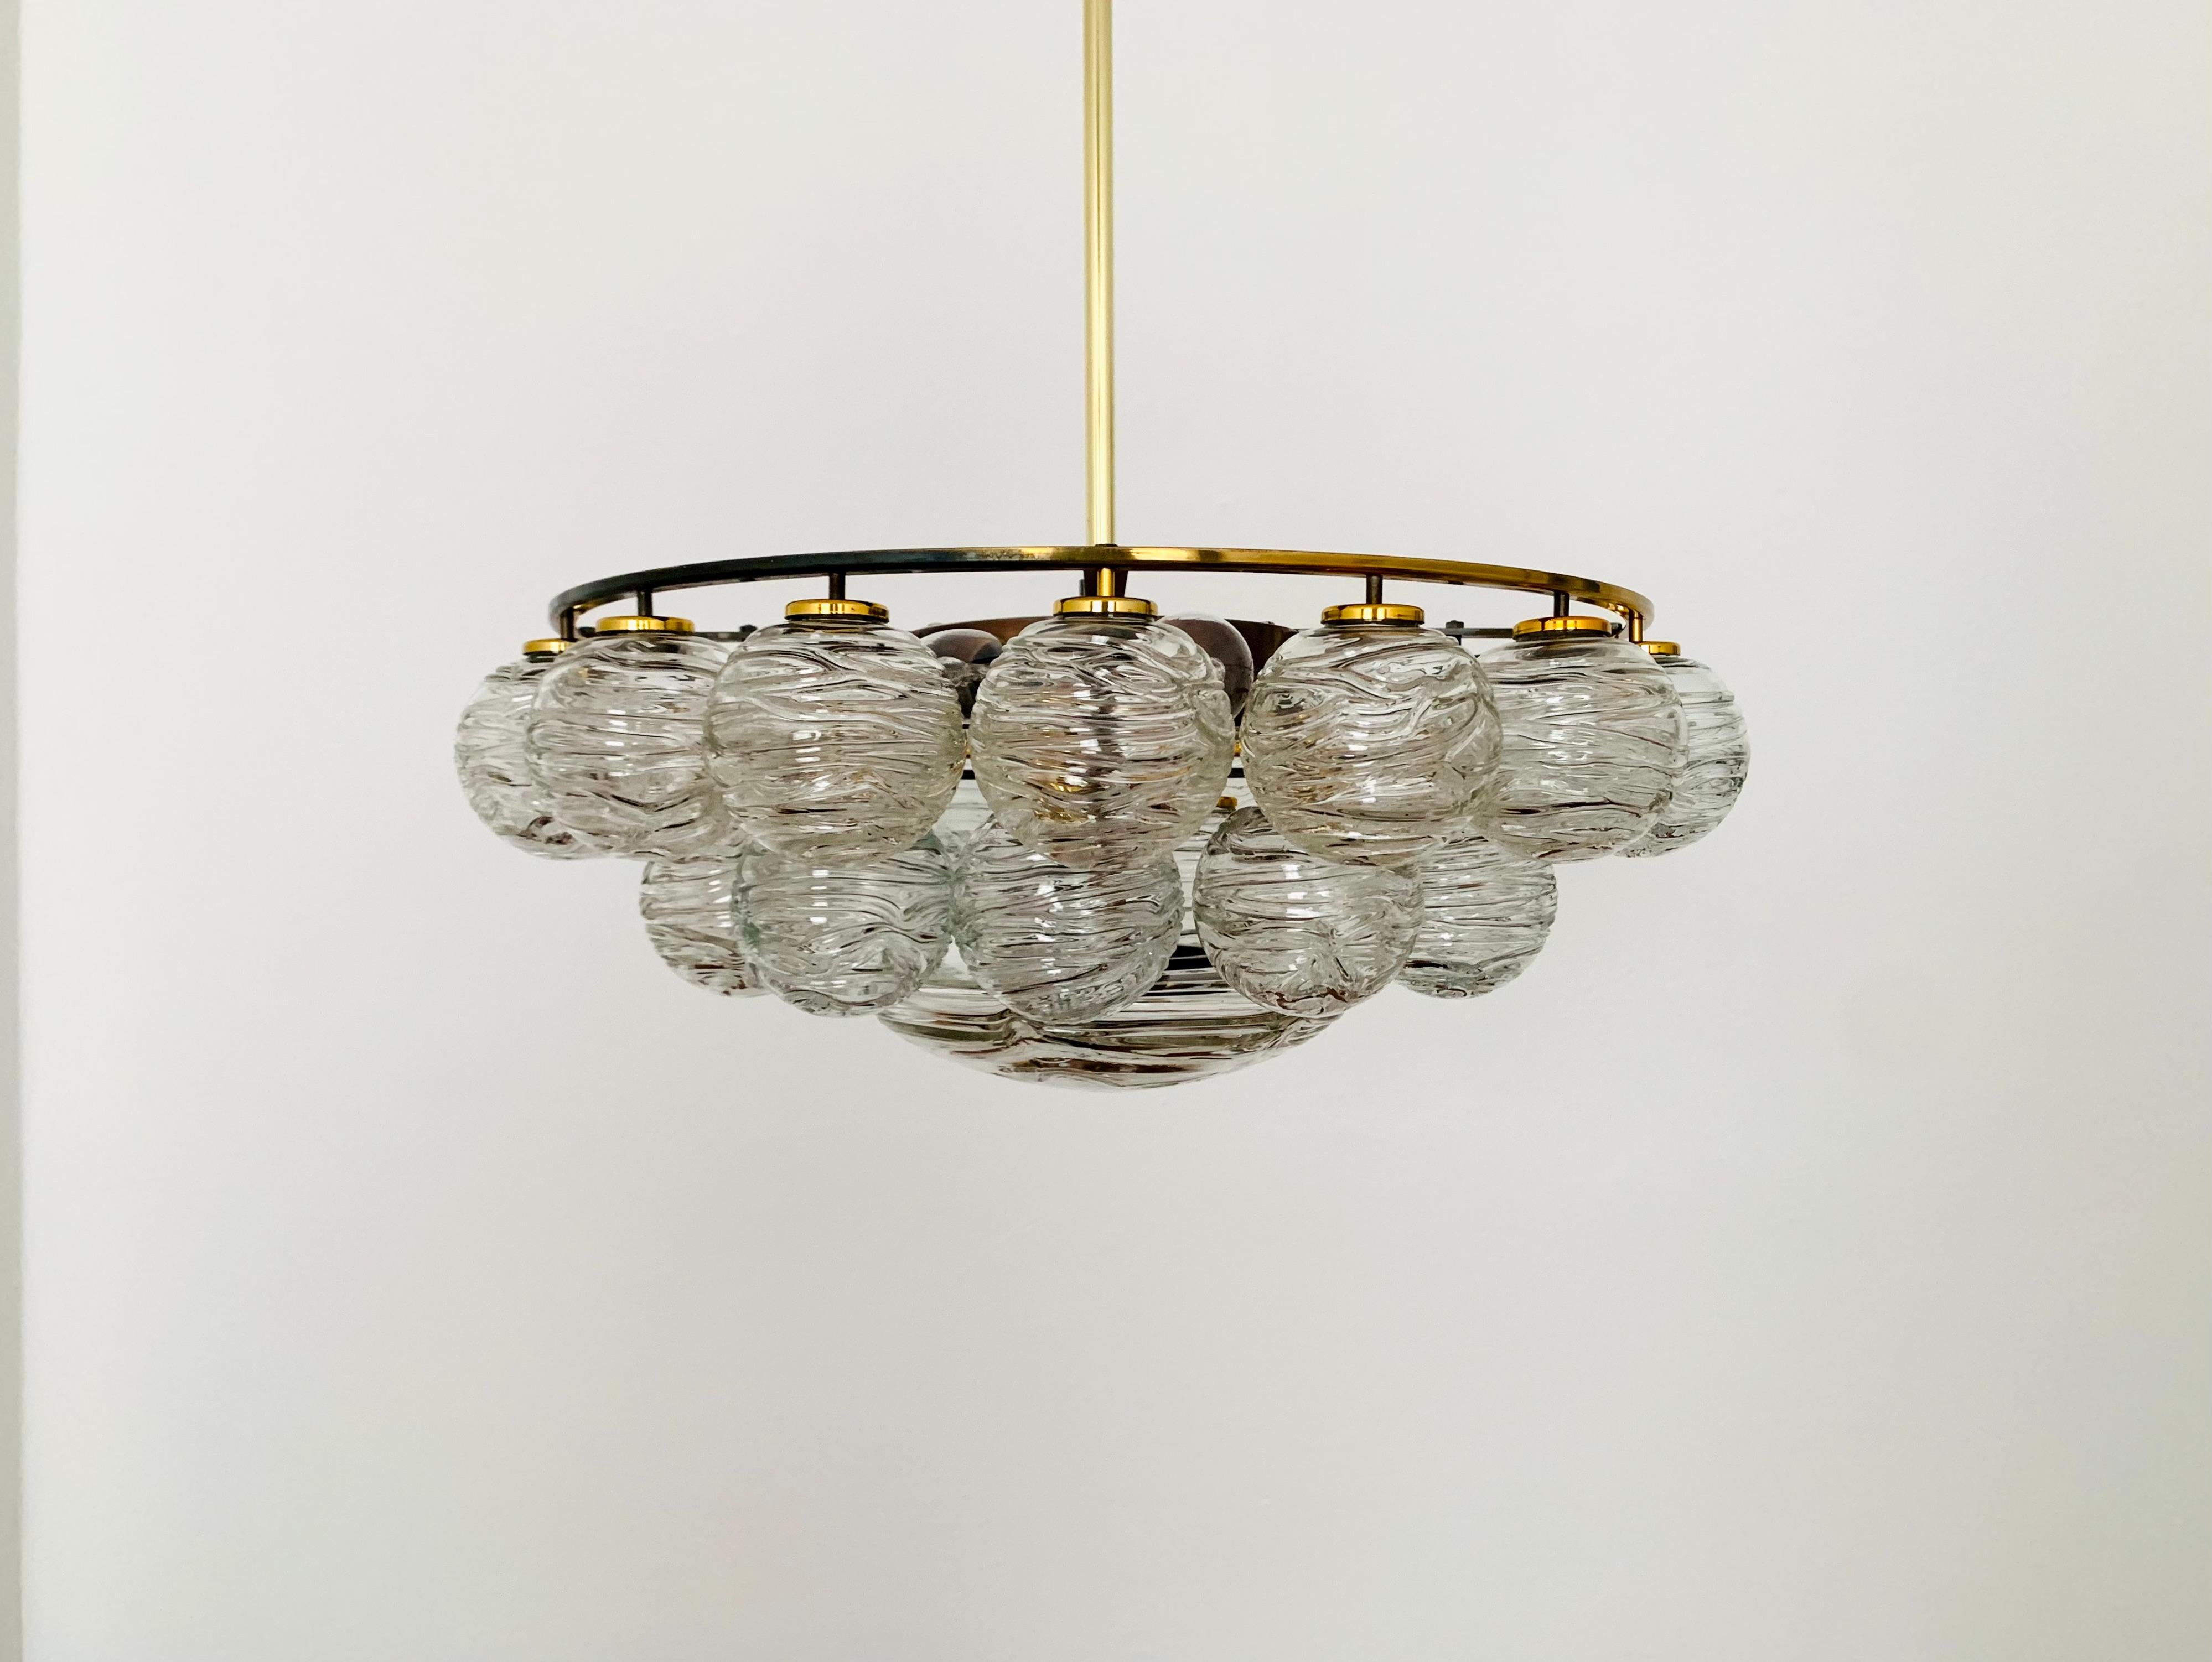 Fabulous ice glass chandelier from the 1960s.
The lamp with the 28 glass pendants is very elegant and impresses with its wonderful design.
The structure in the glasses creates a spectacularly sparkling light.
An absolute